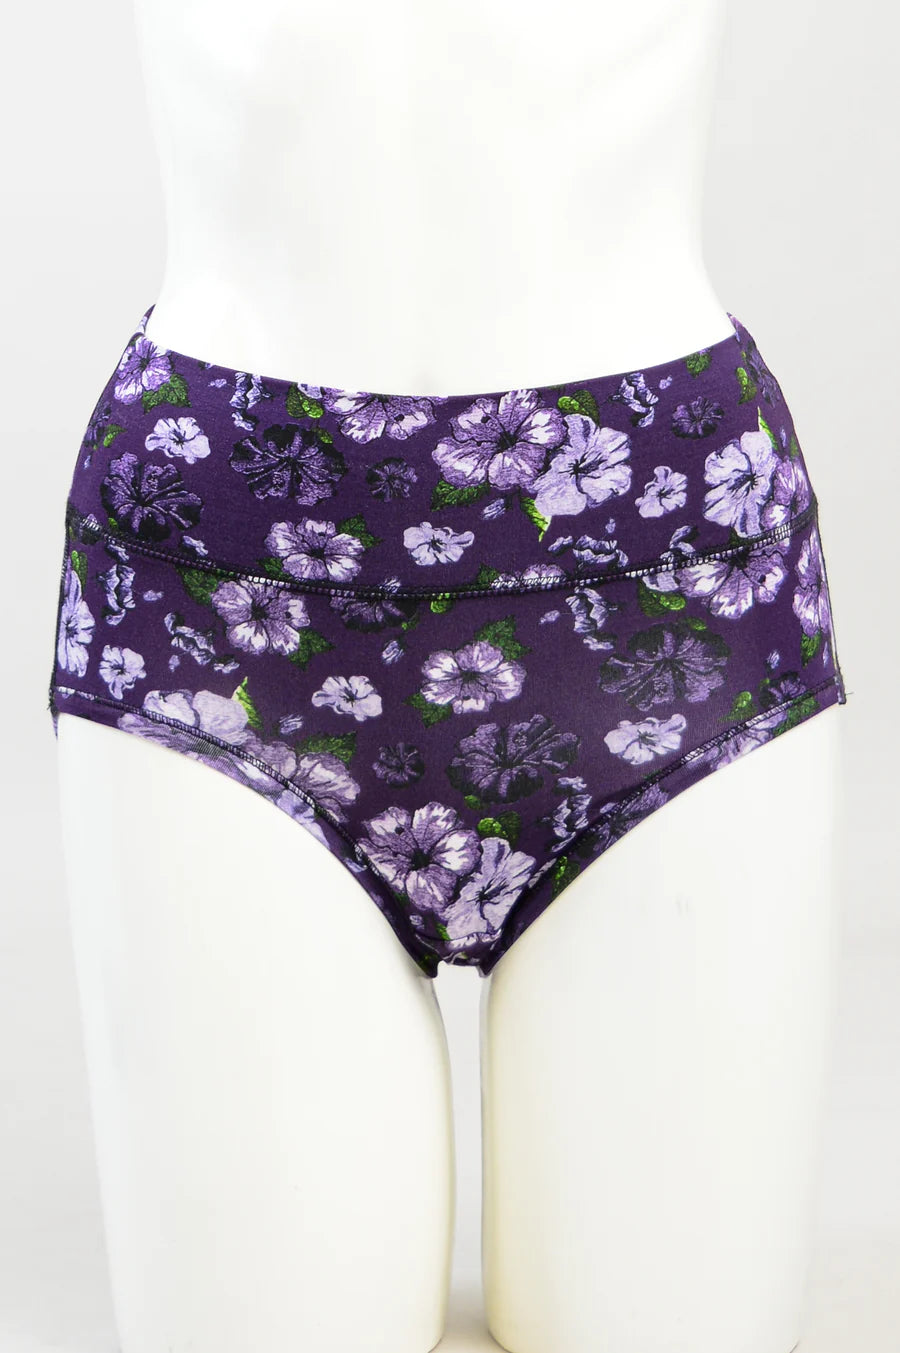 Sweet Bamboo 2 Piece Underwear In Purple Ice Skates and Solid Purple  Pattern